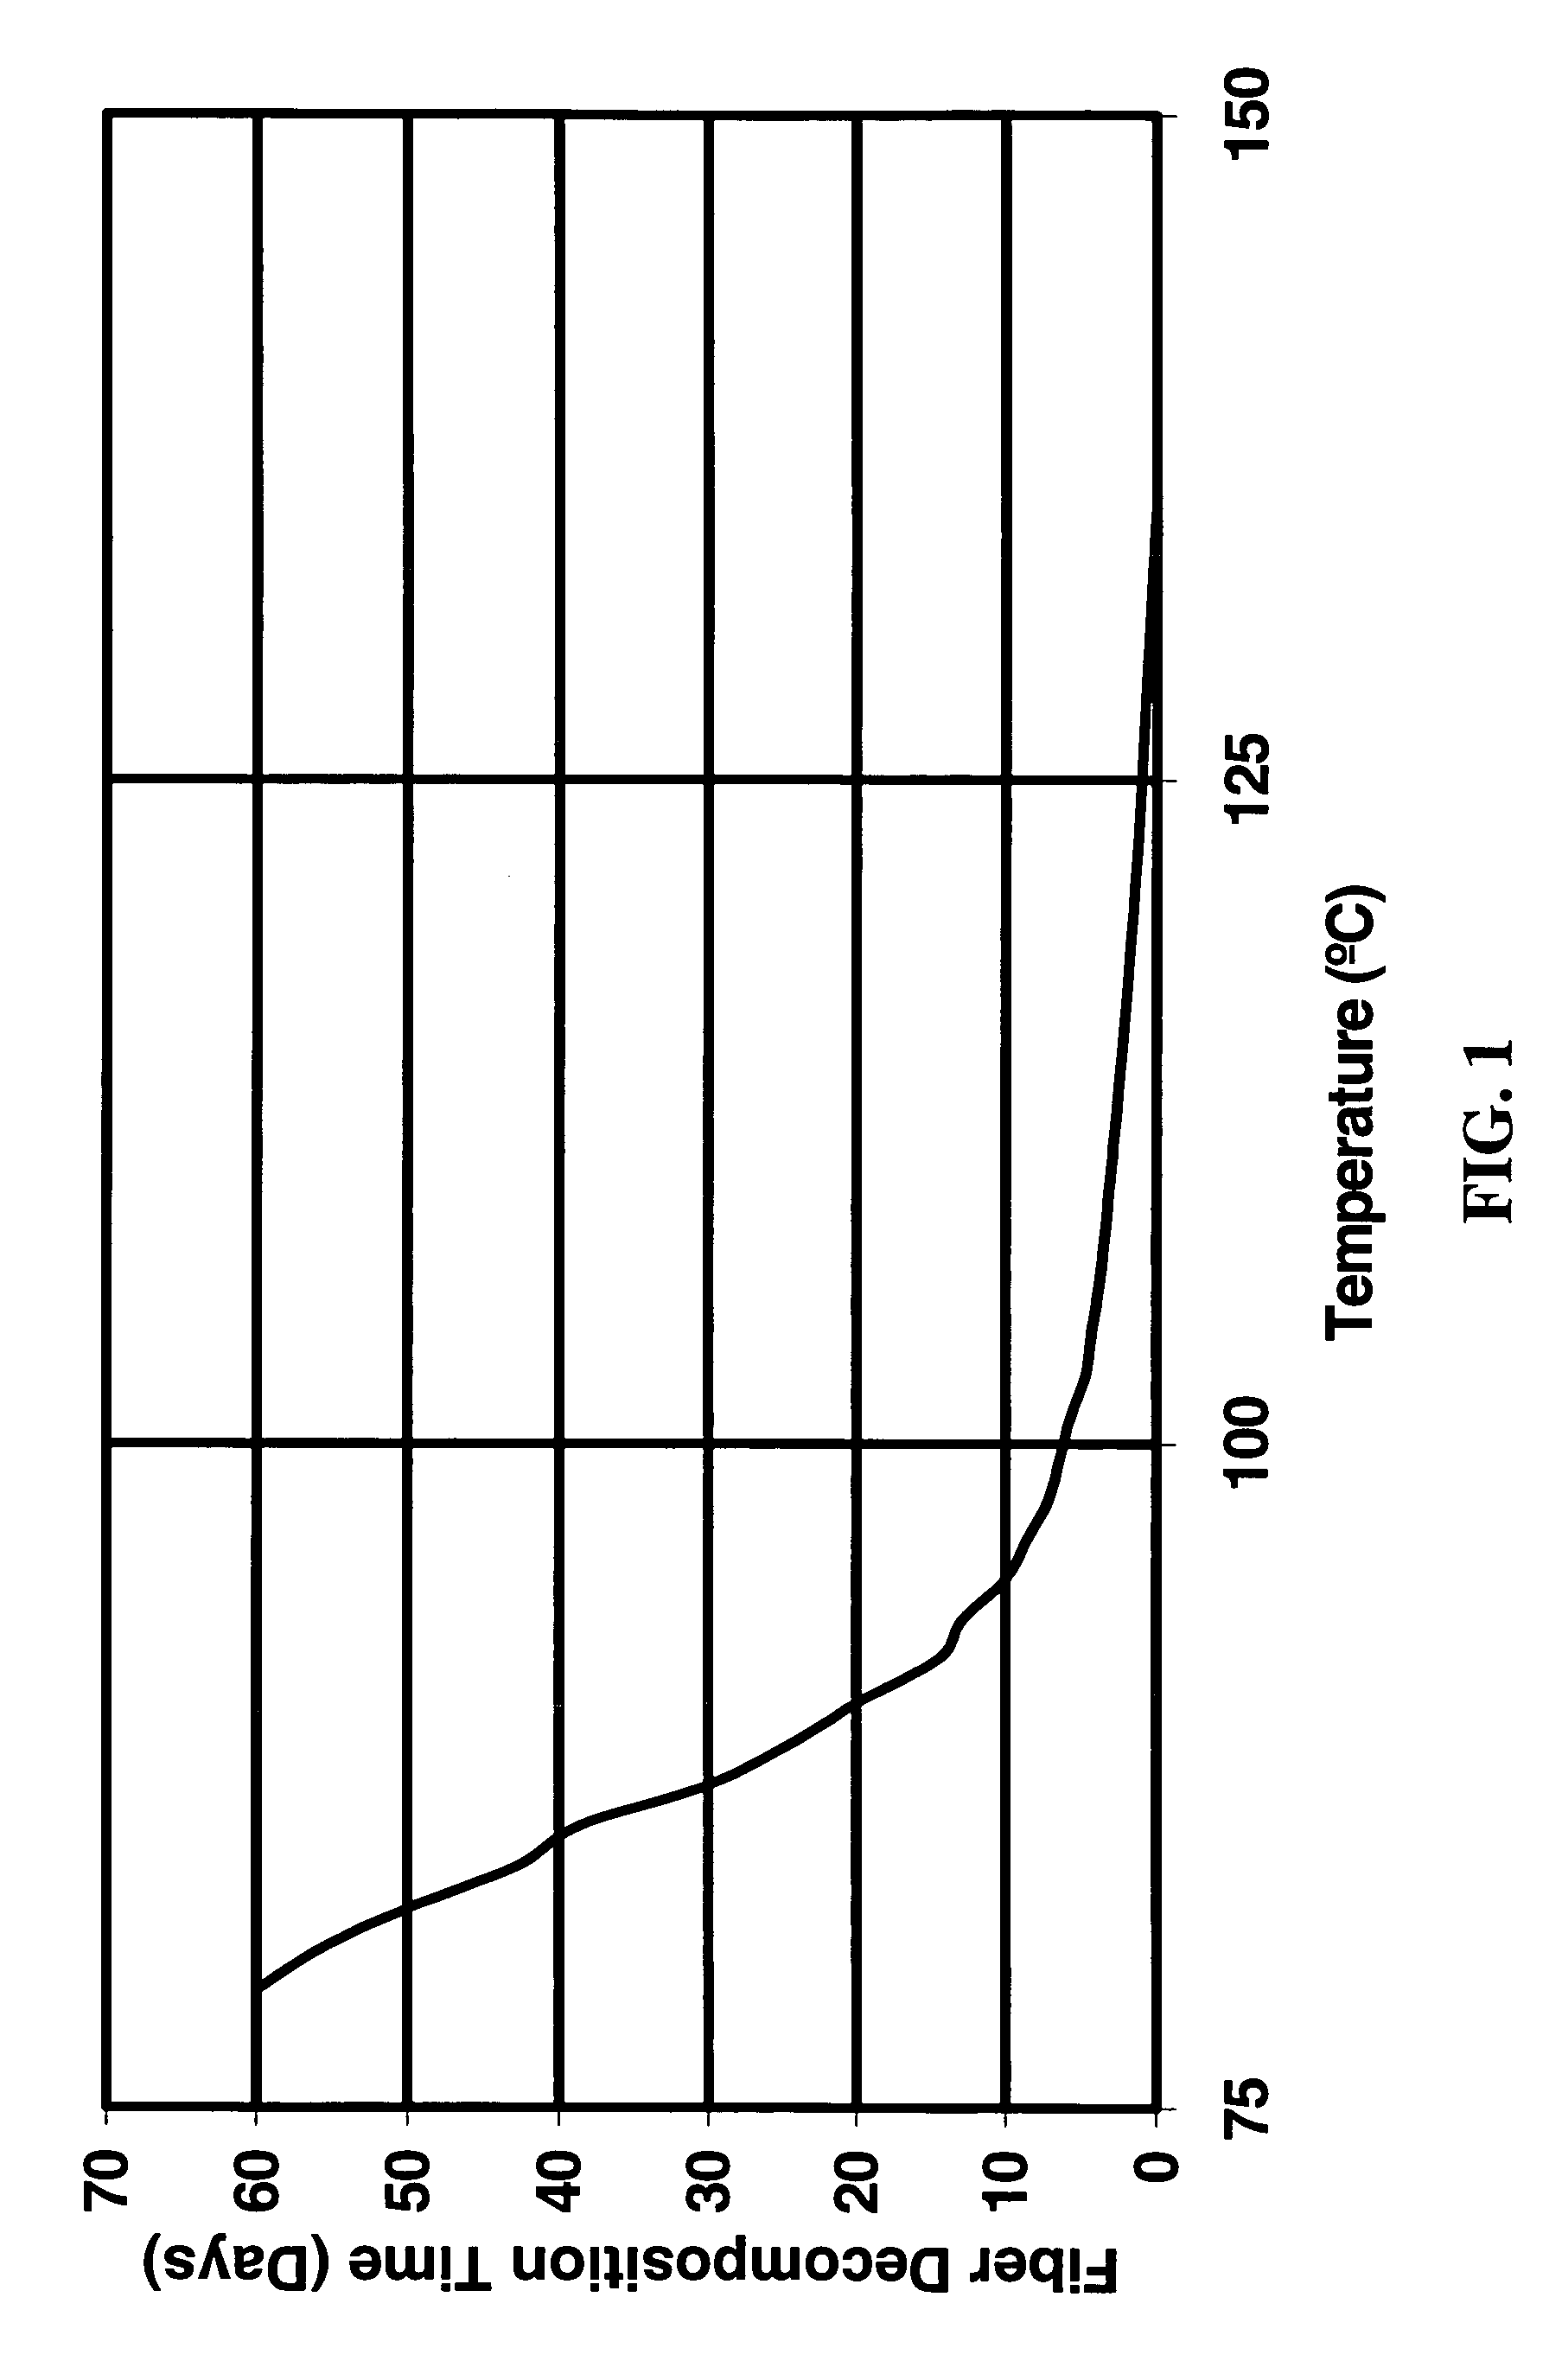 Method of using degradable fiber systems for stimulation